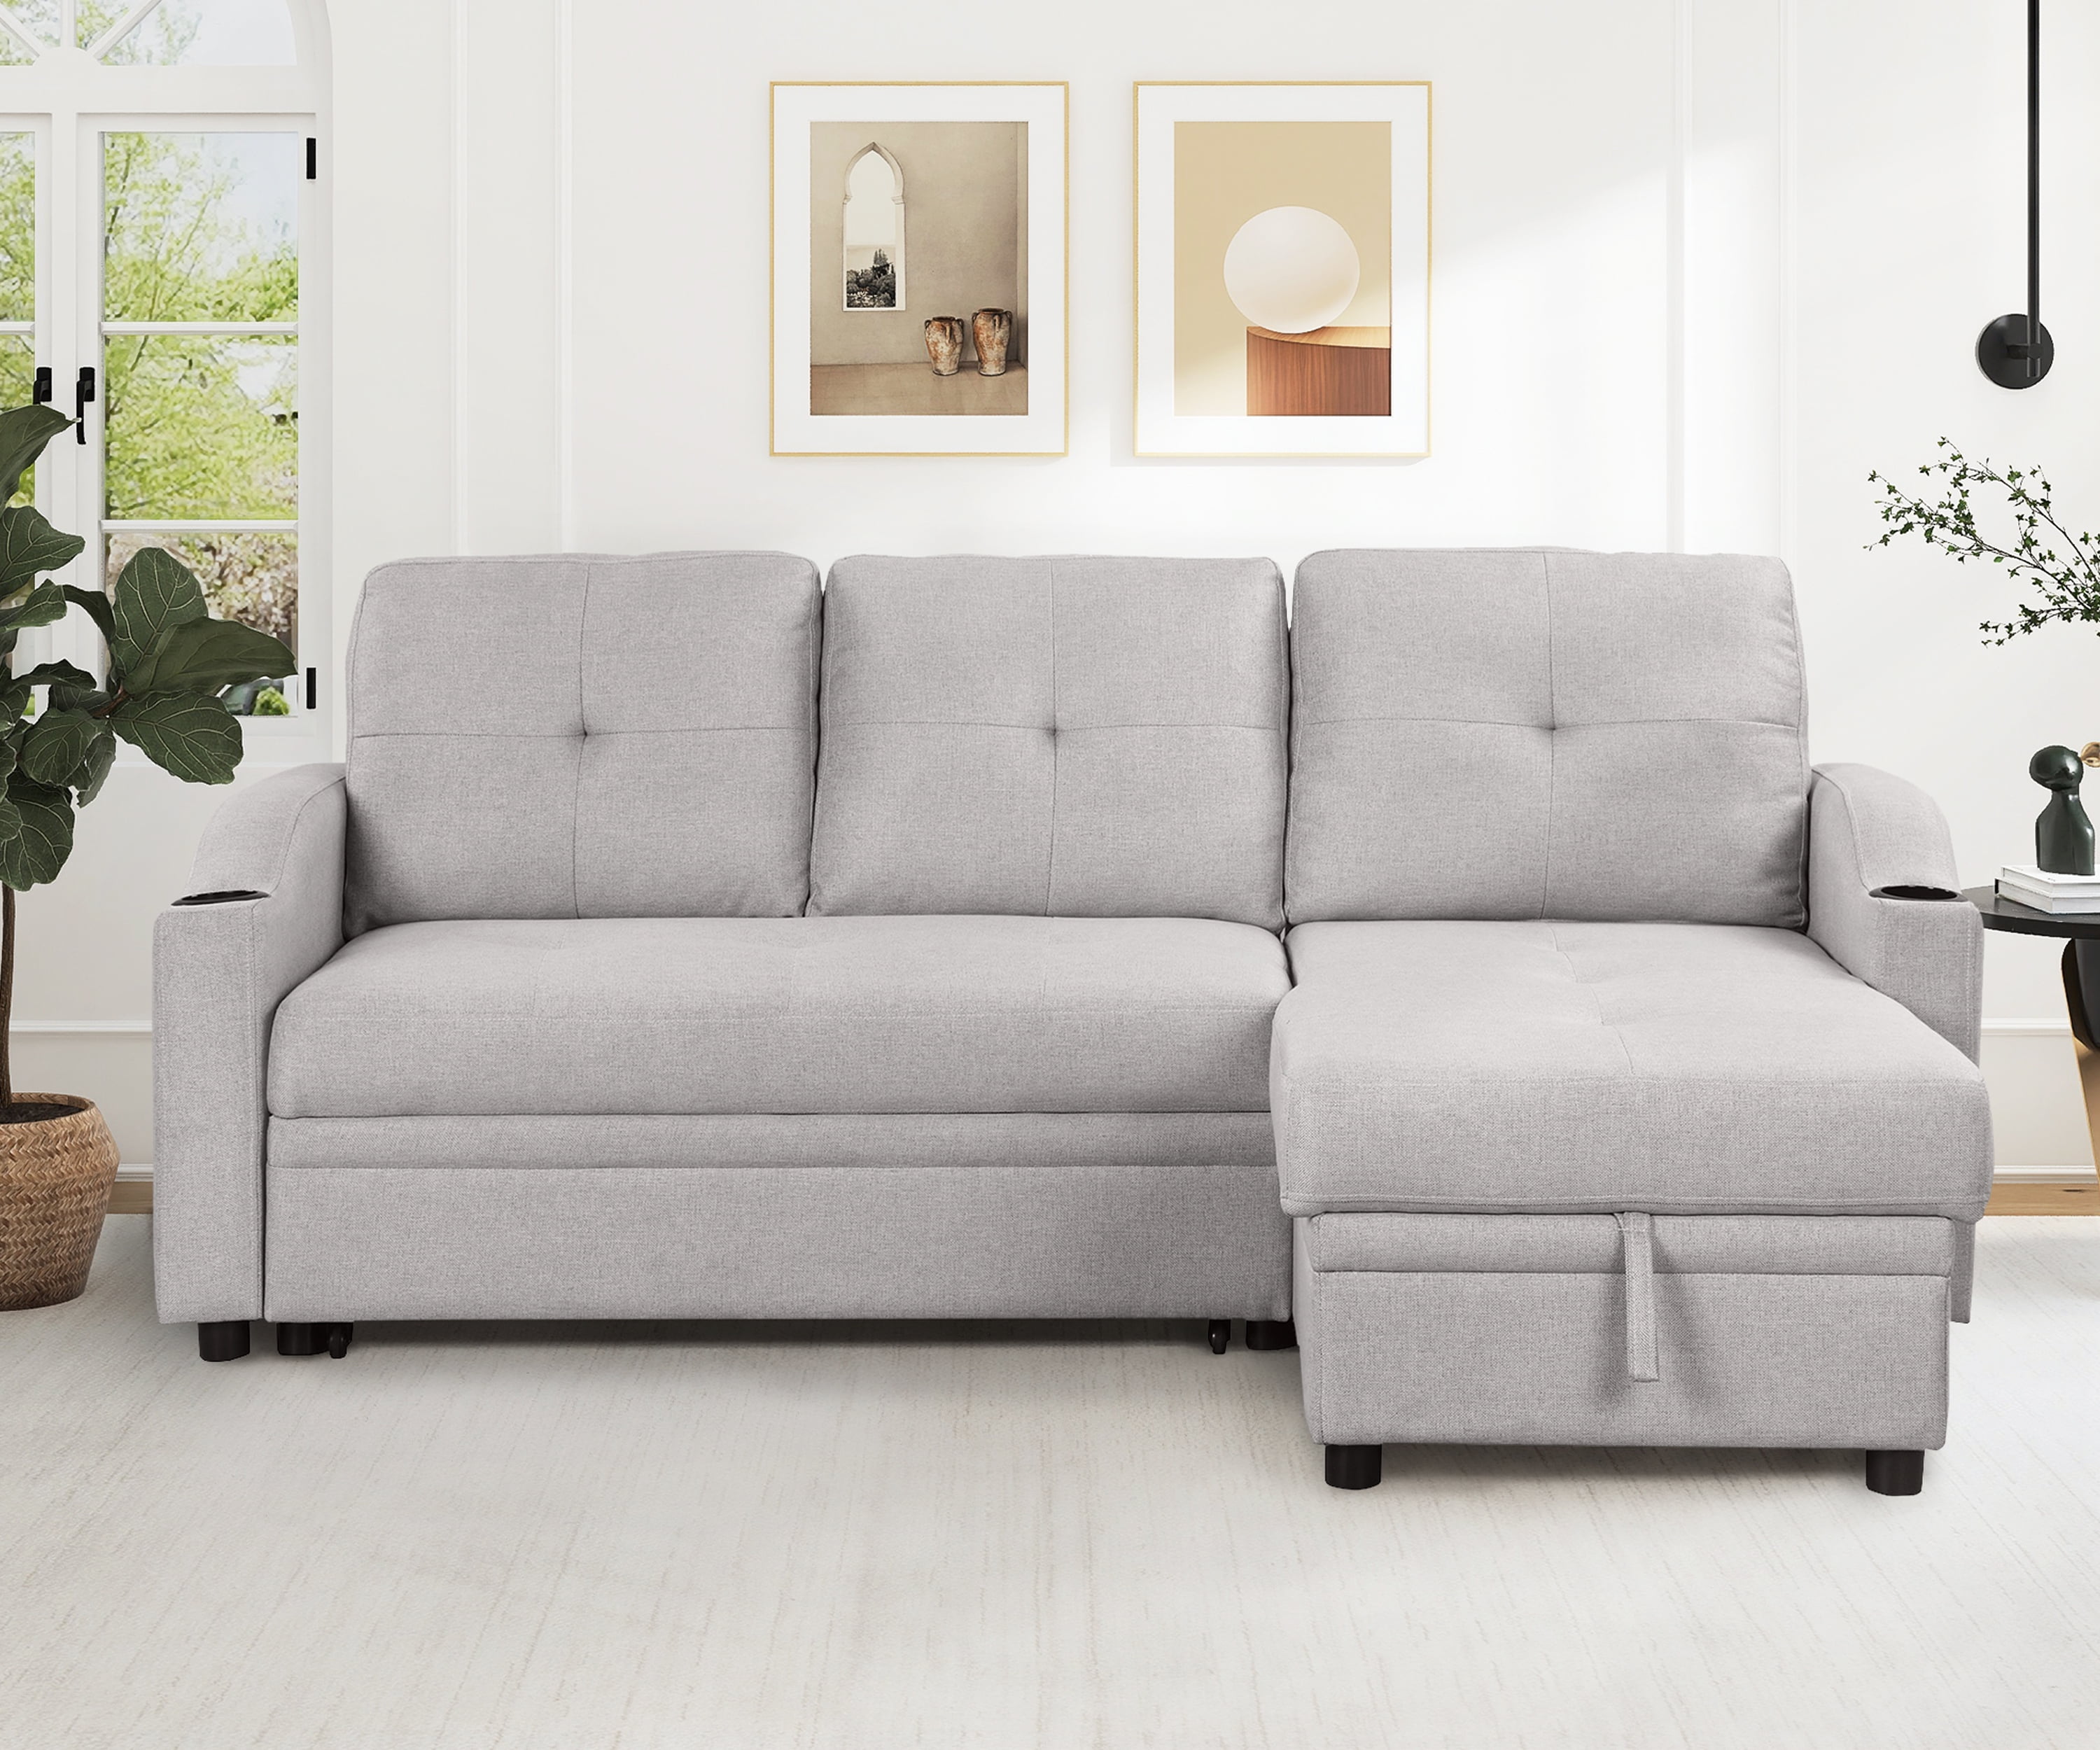 Euroco 80 Pull Out Sofa Bed L Shape